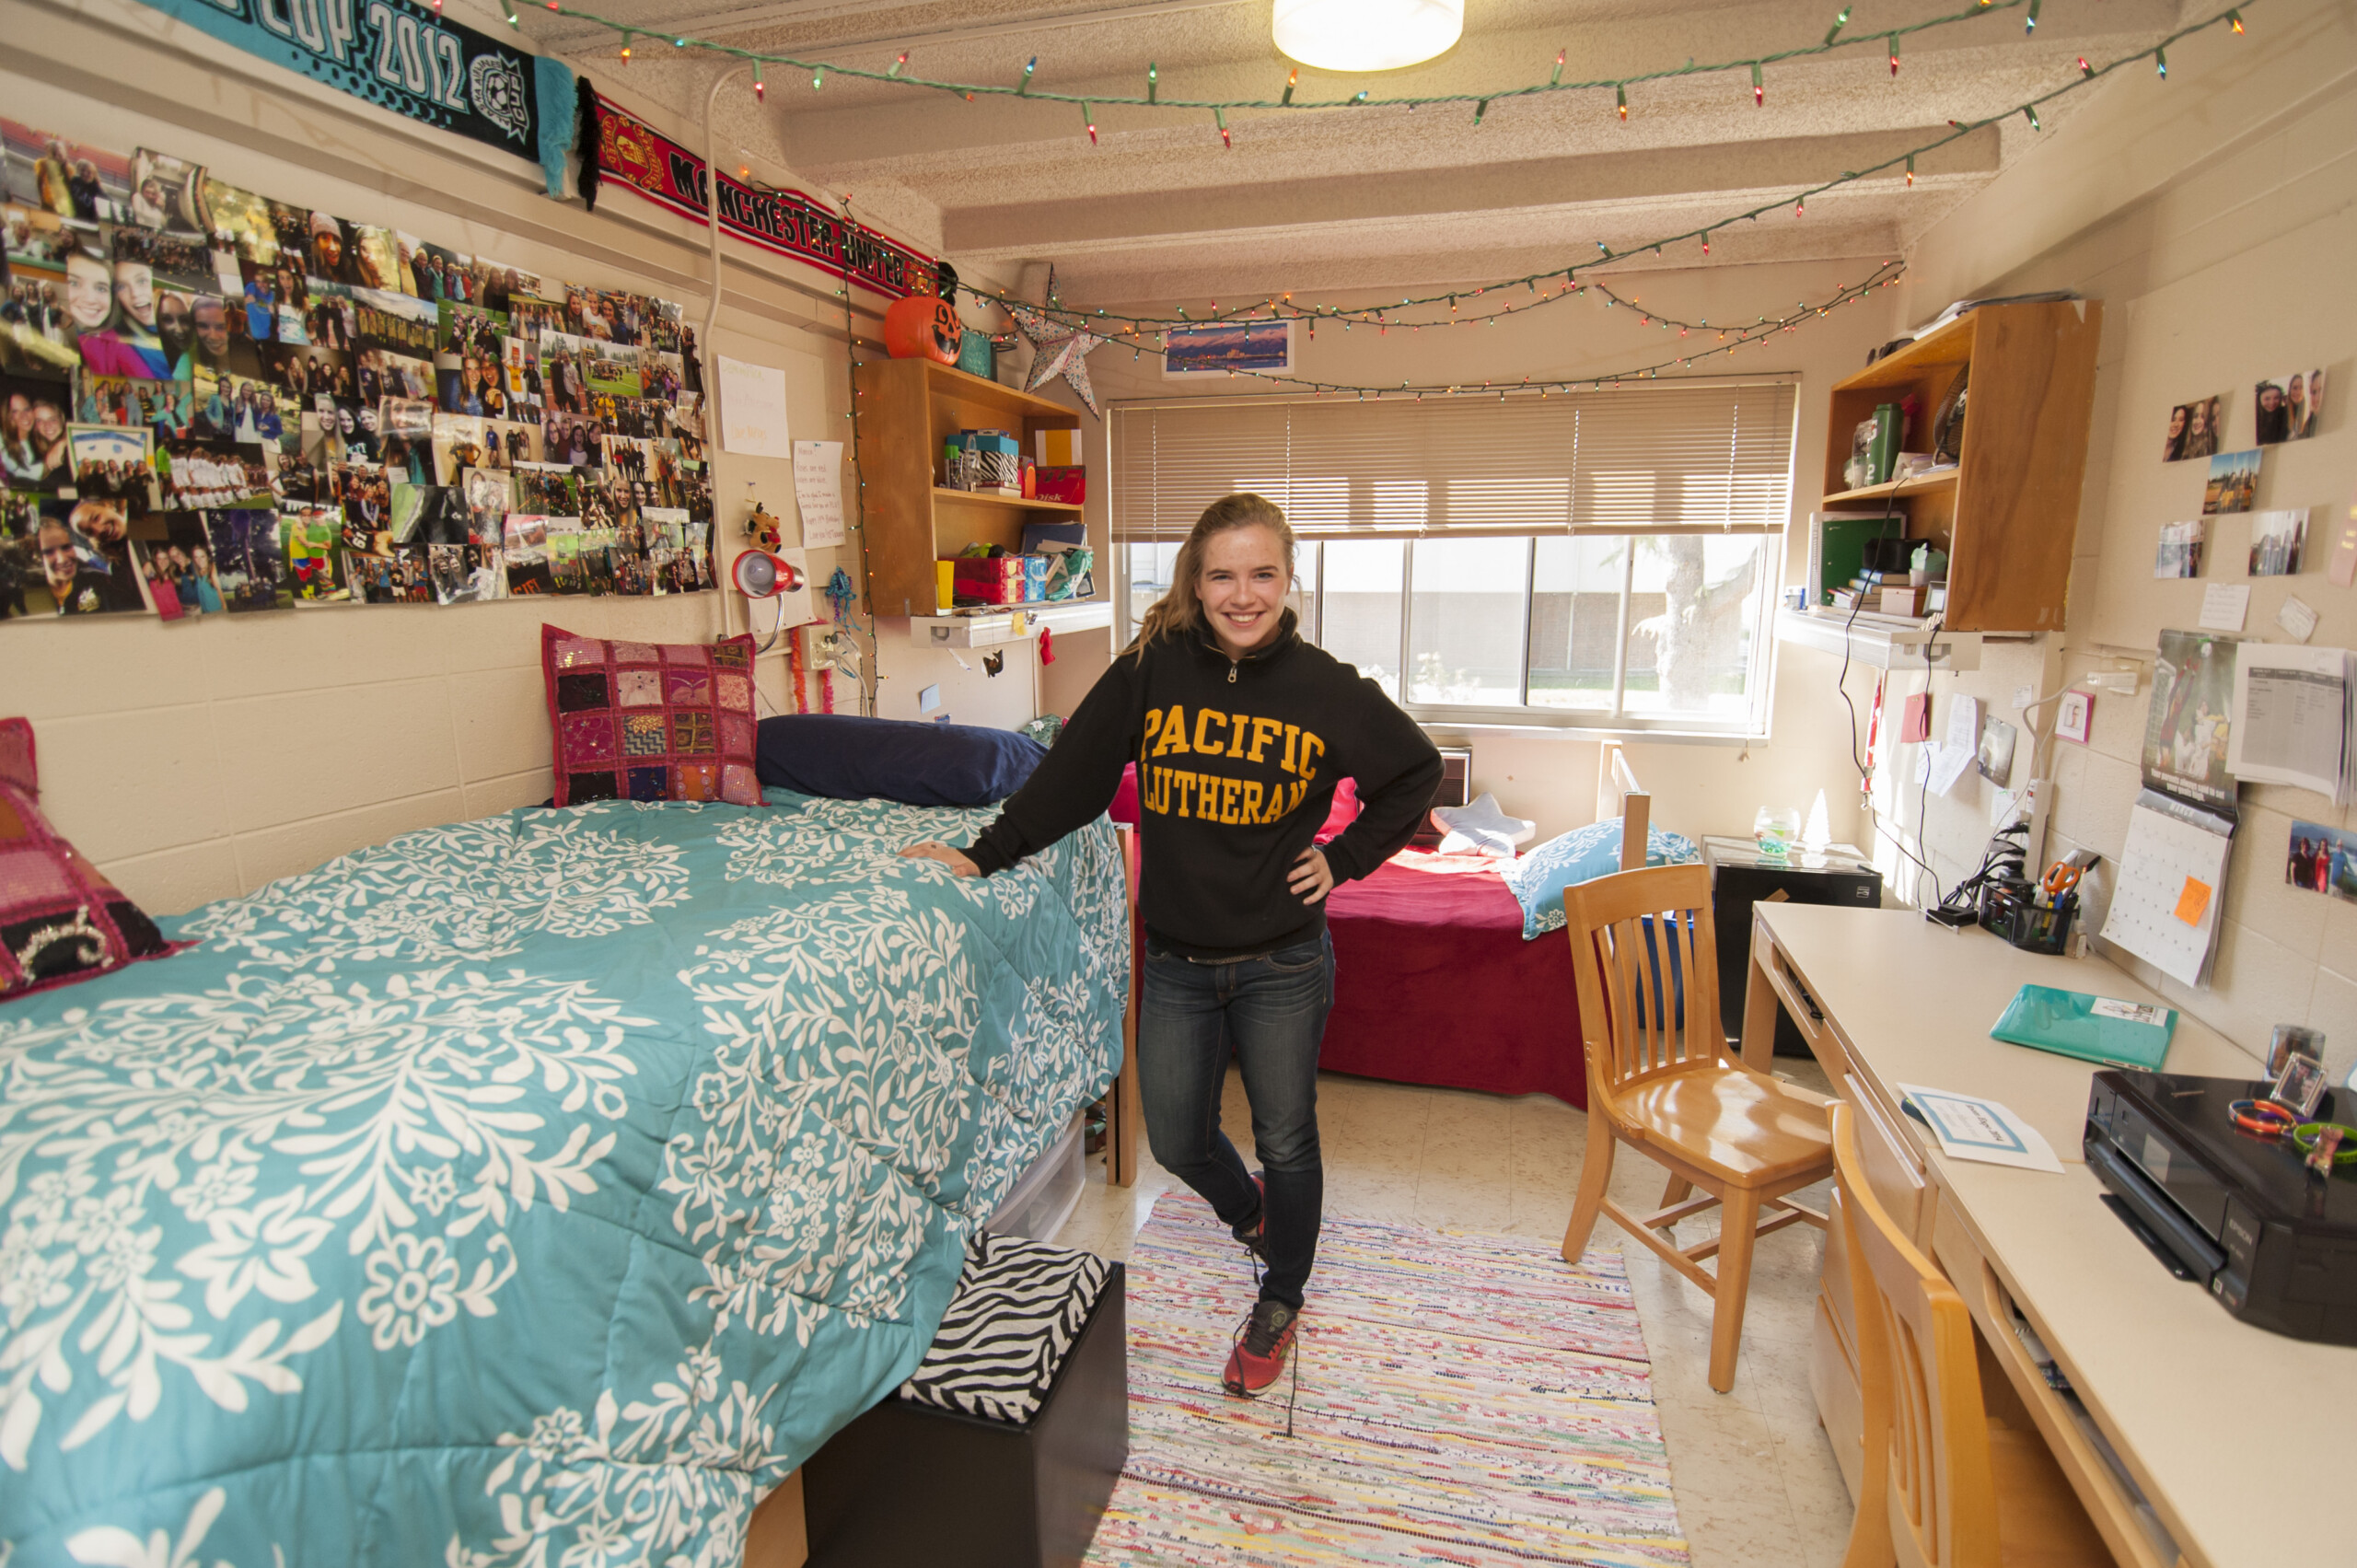 Female student stands in the middle of her dorm room wearing a black and yellow Pacific Lutheran University sweatshirts, blue jeans and red sneakers.